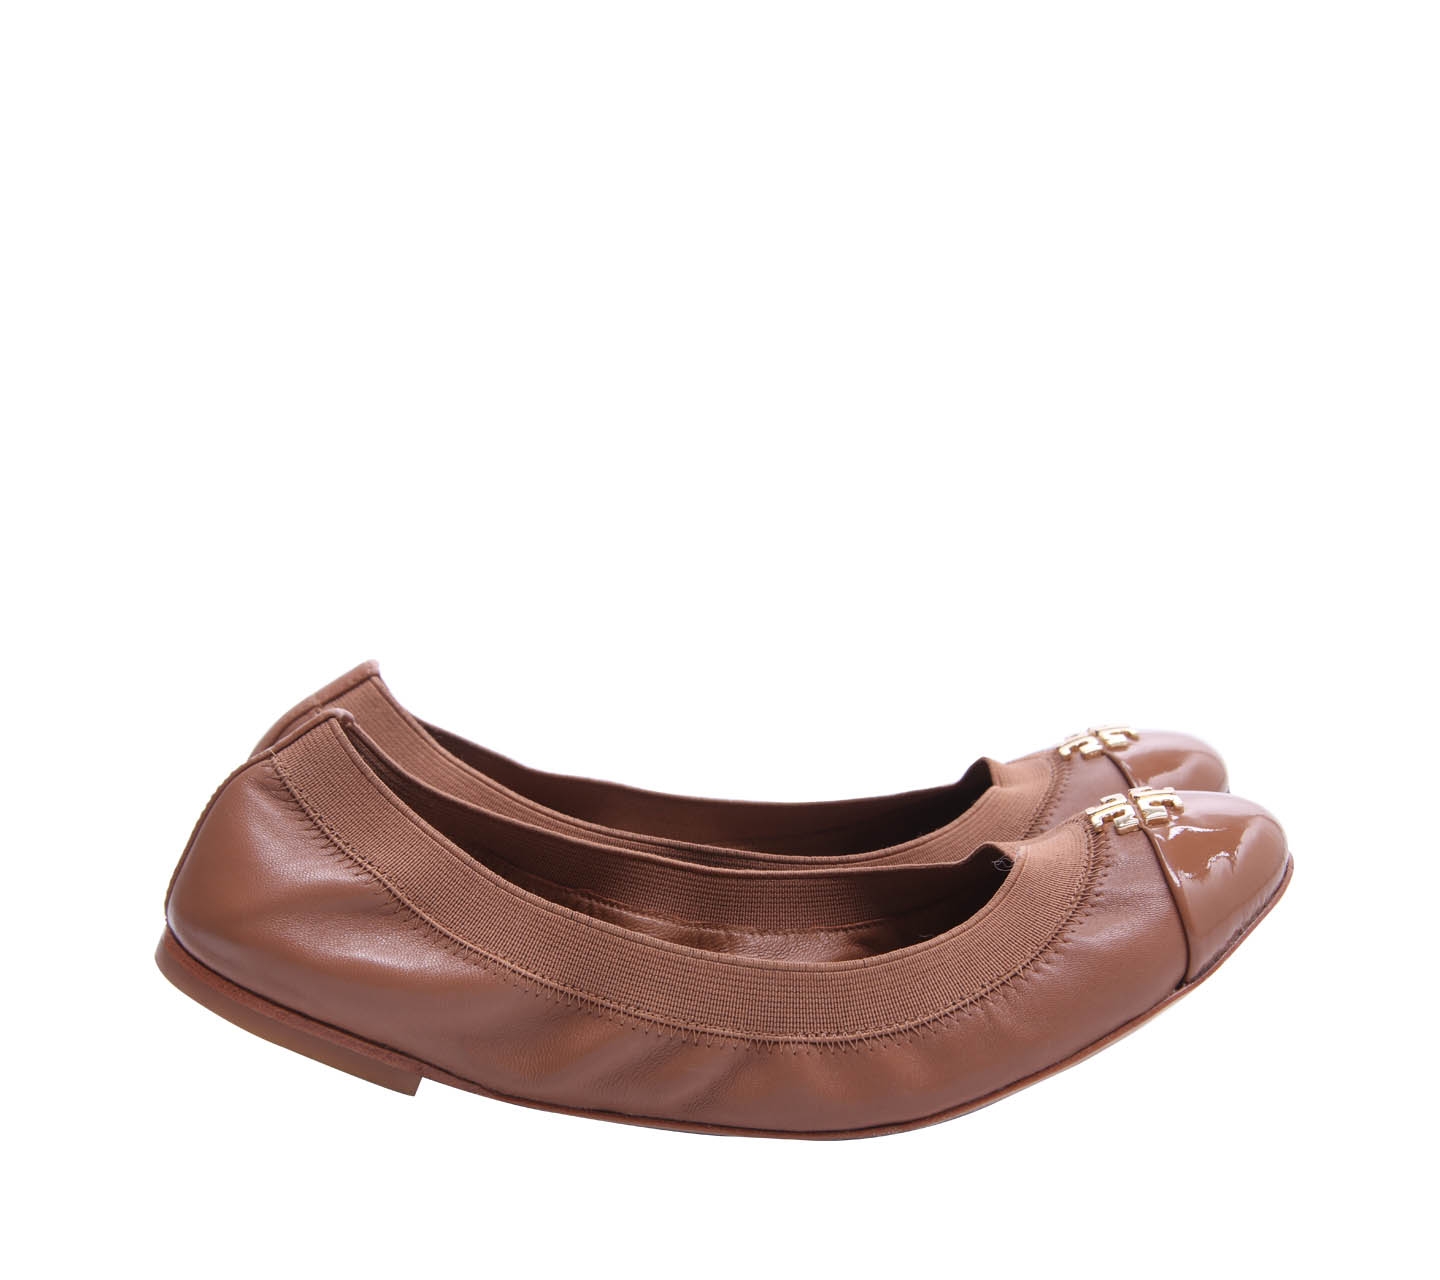 Tory Burch Brown Jolie Ballet Nappa Leather Flats